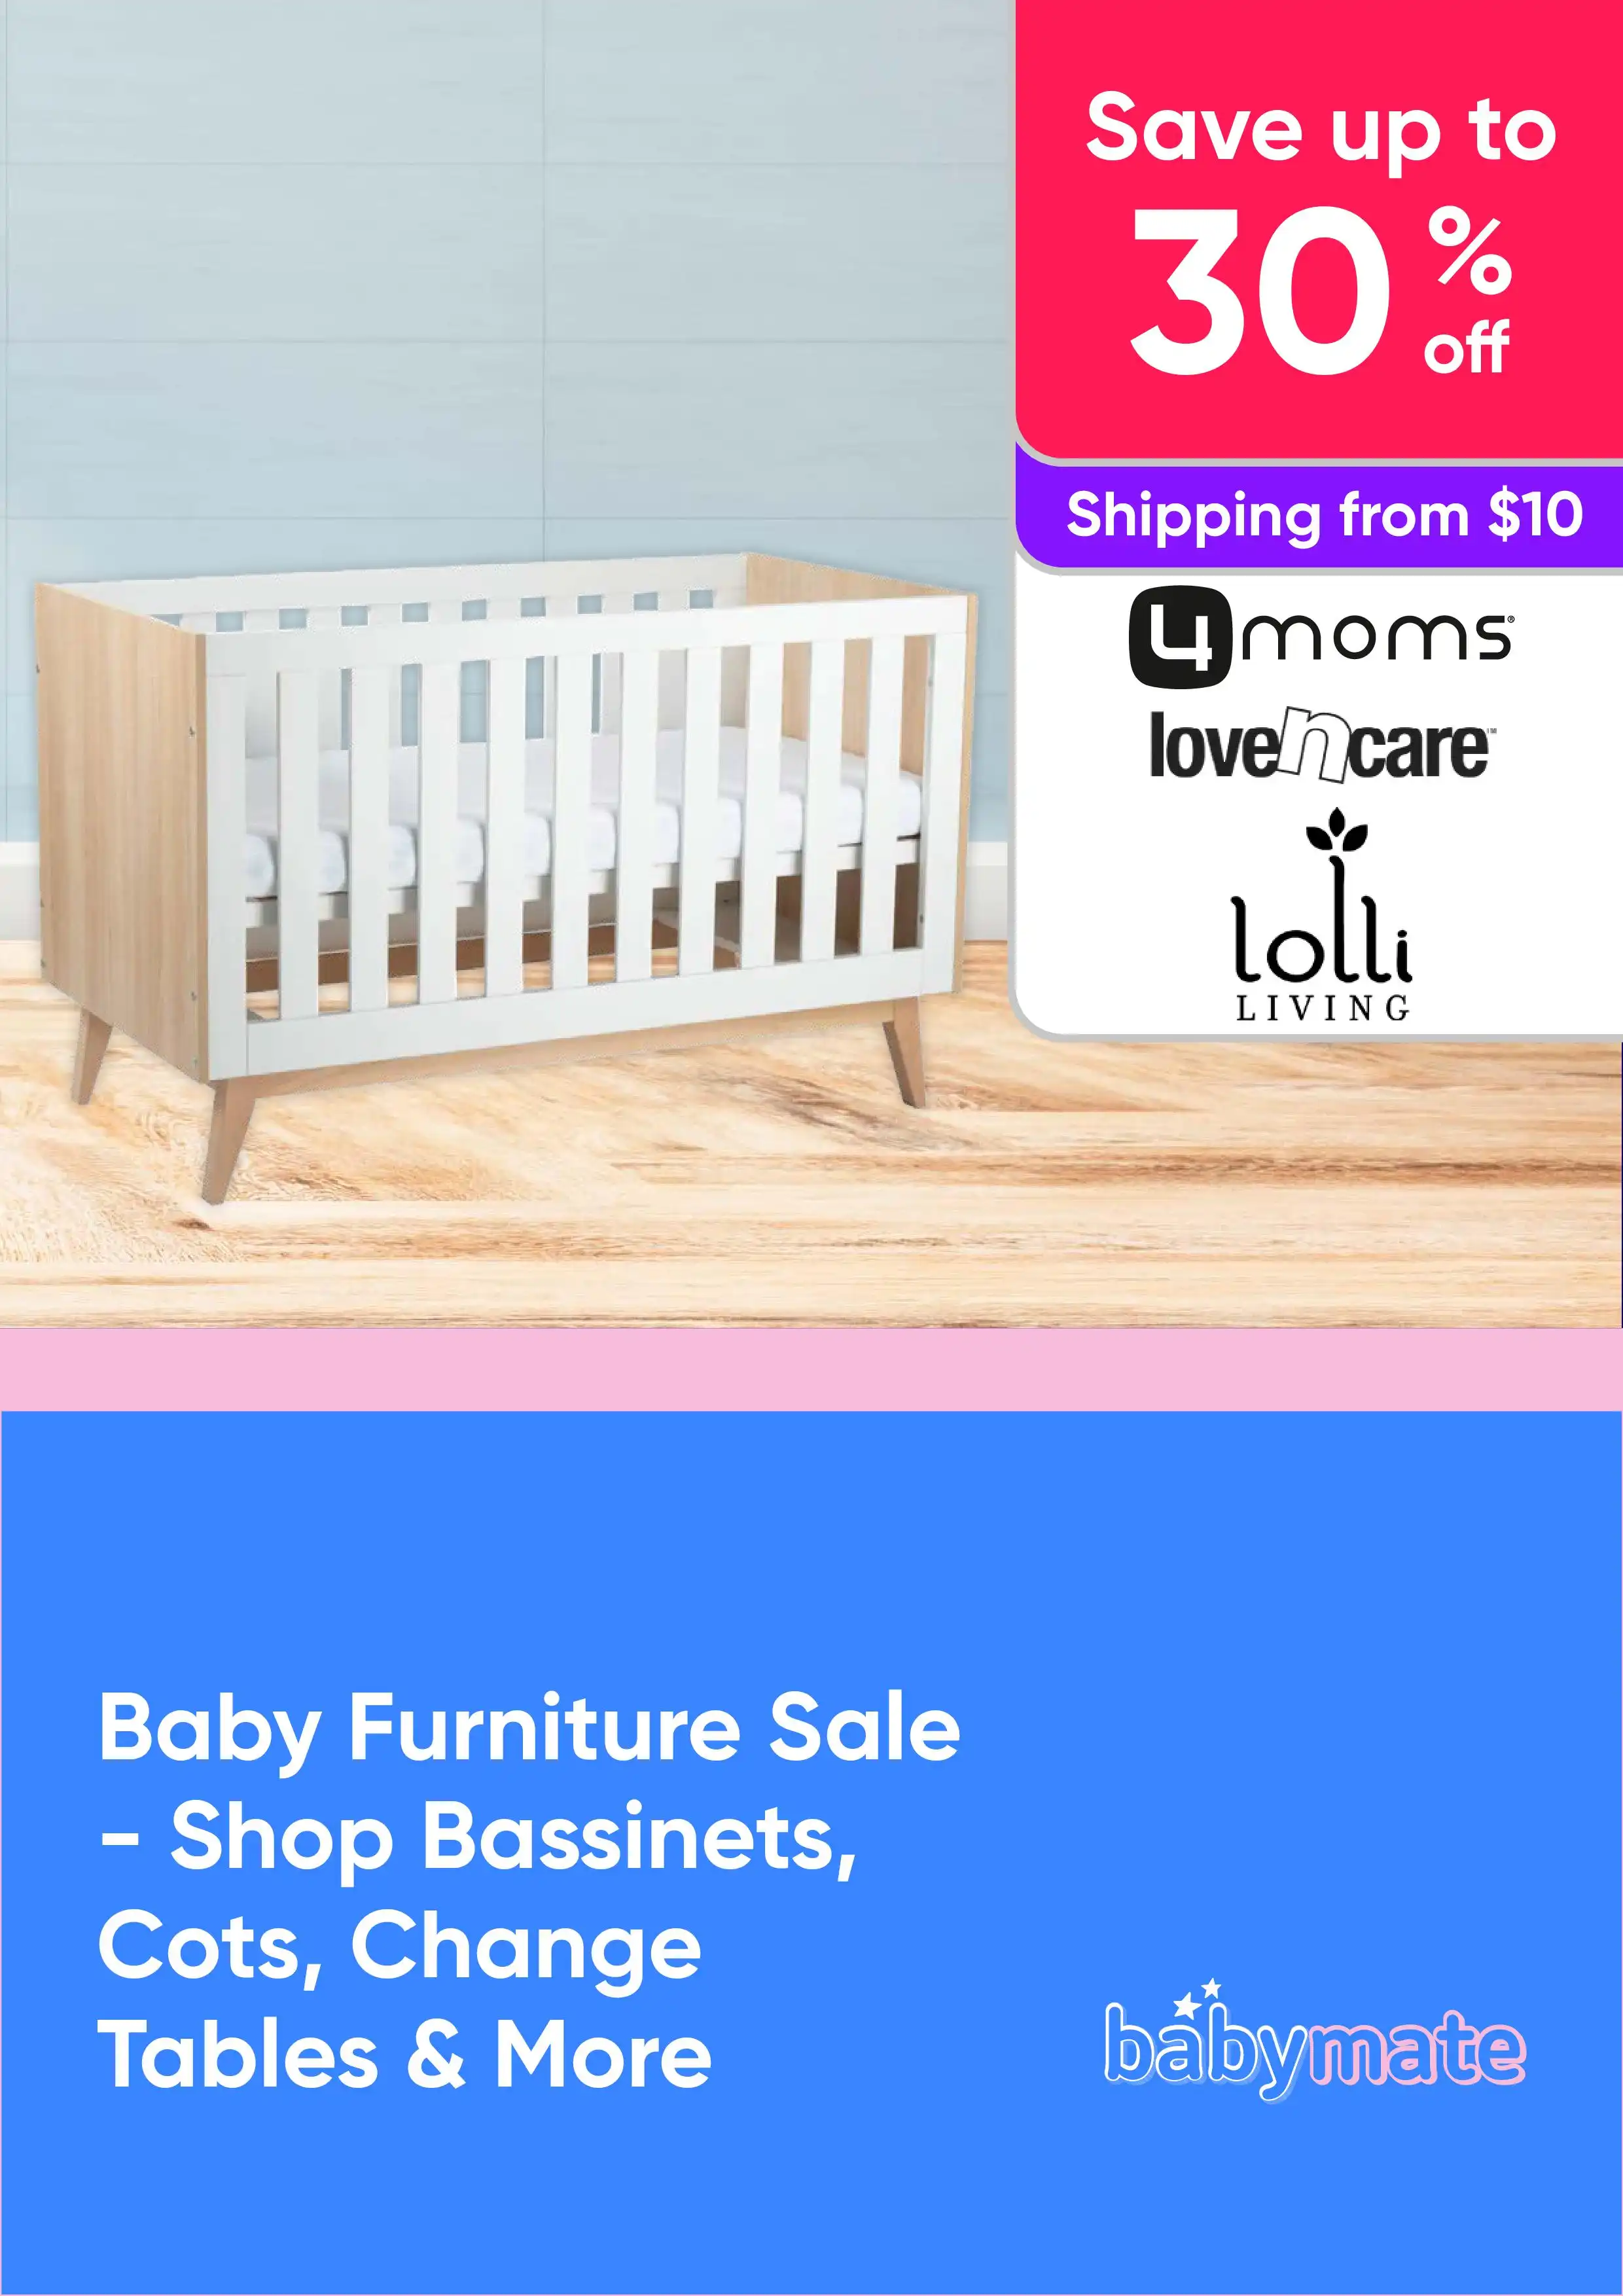 Baby Furniture Sale - Shop and Save on Bassinets, Cots, Change Tables